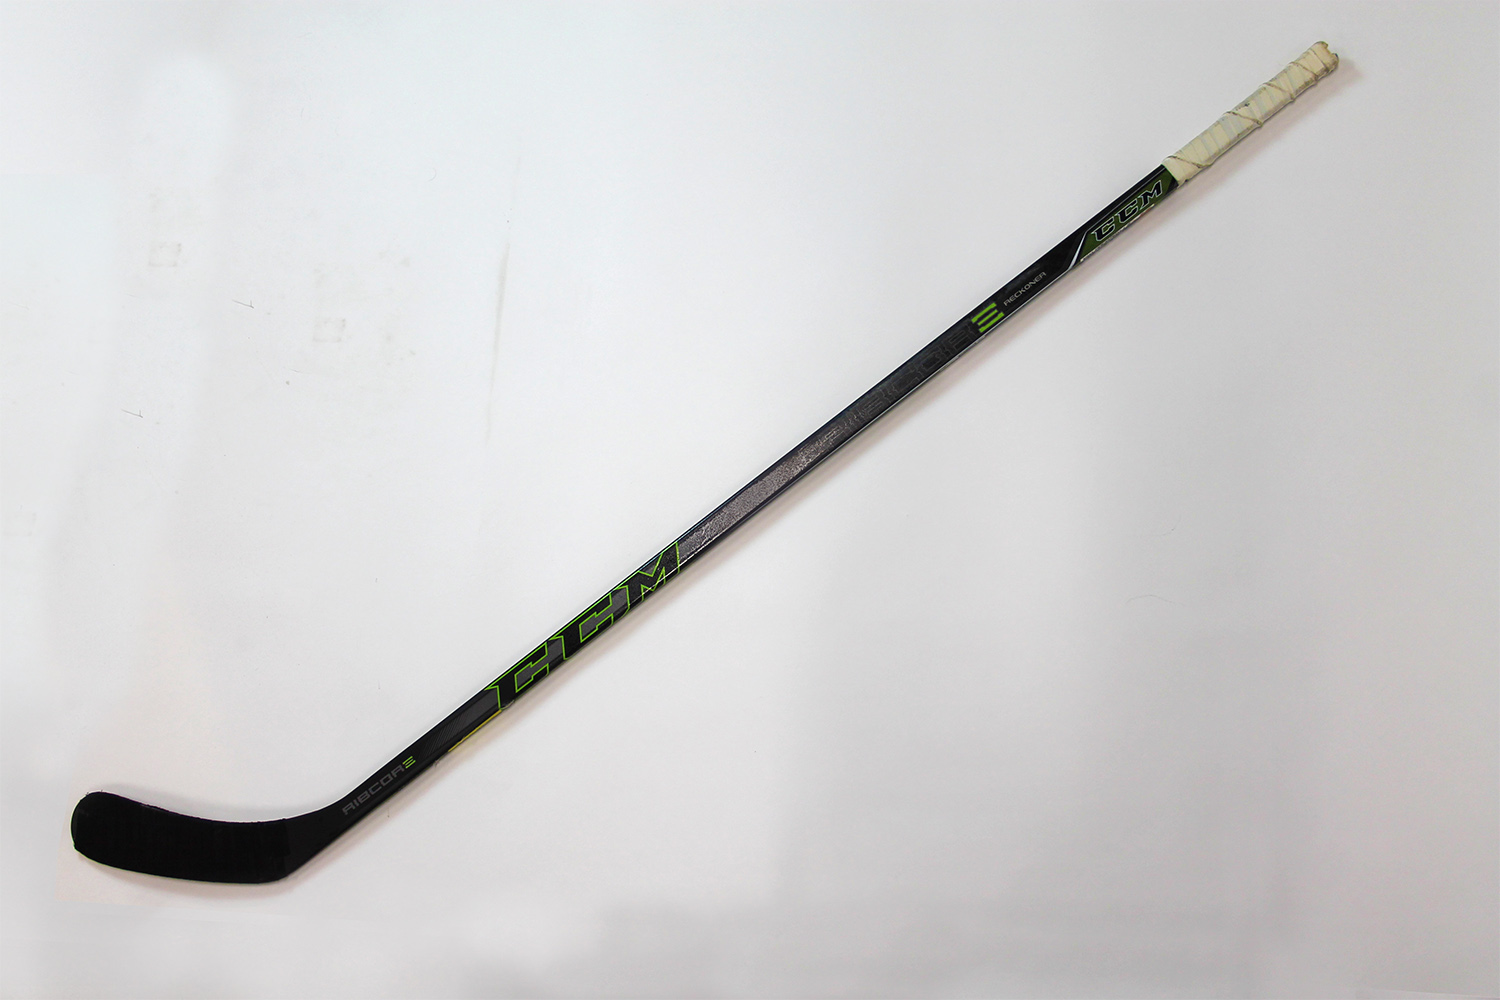 Sidney Crosby Signed AND Game-Used CCM Ribcor Reckoner Stick